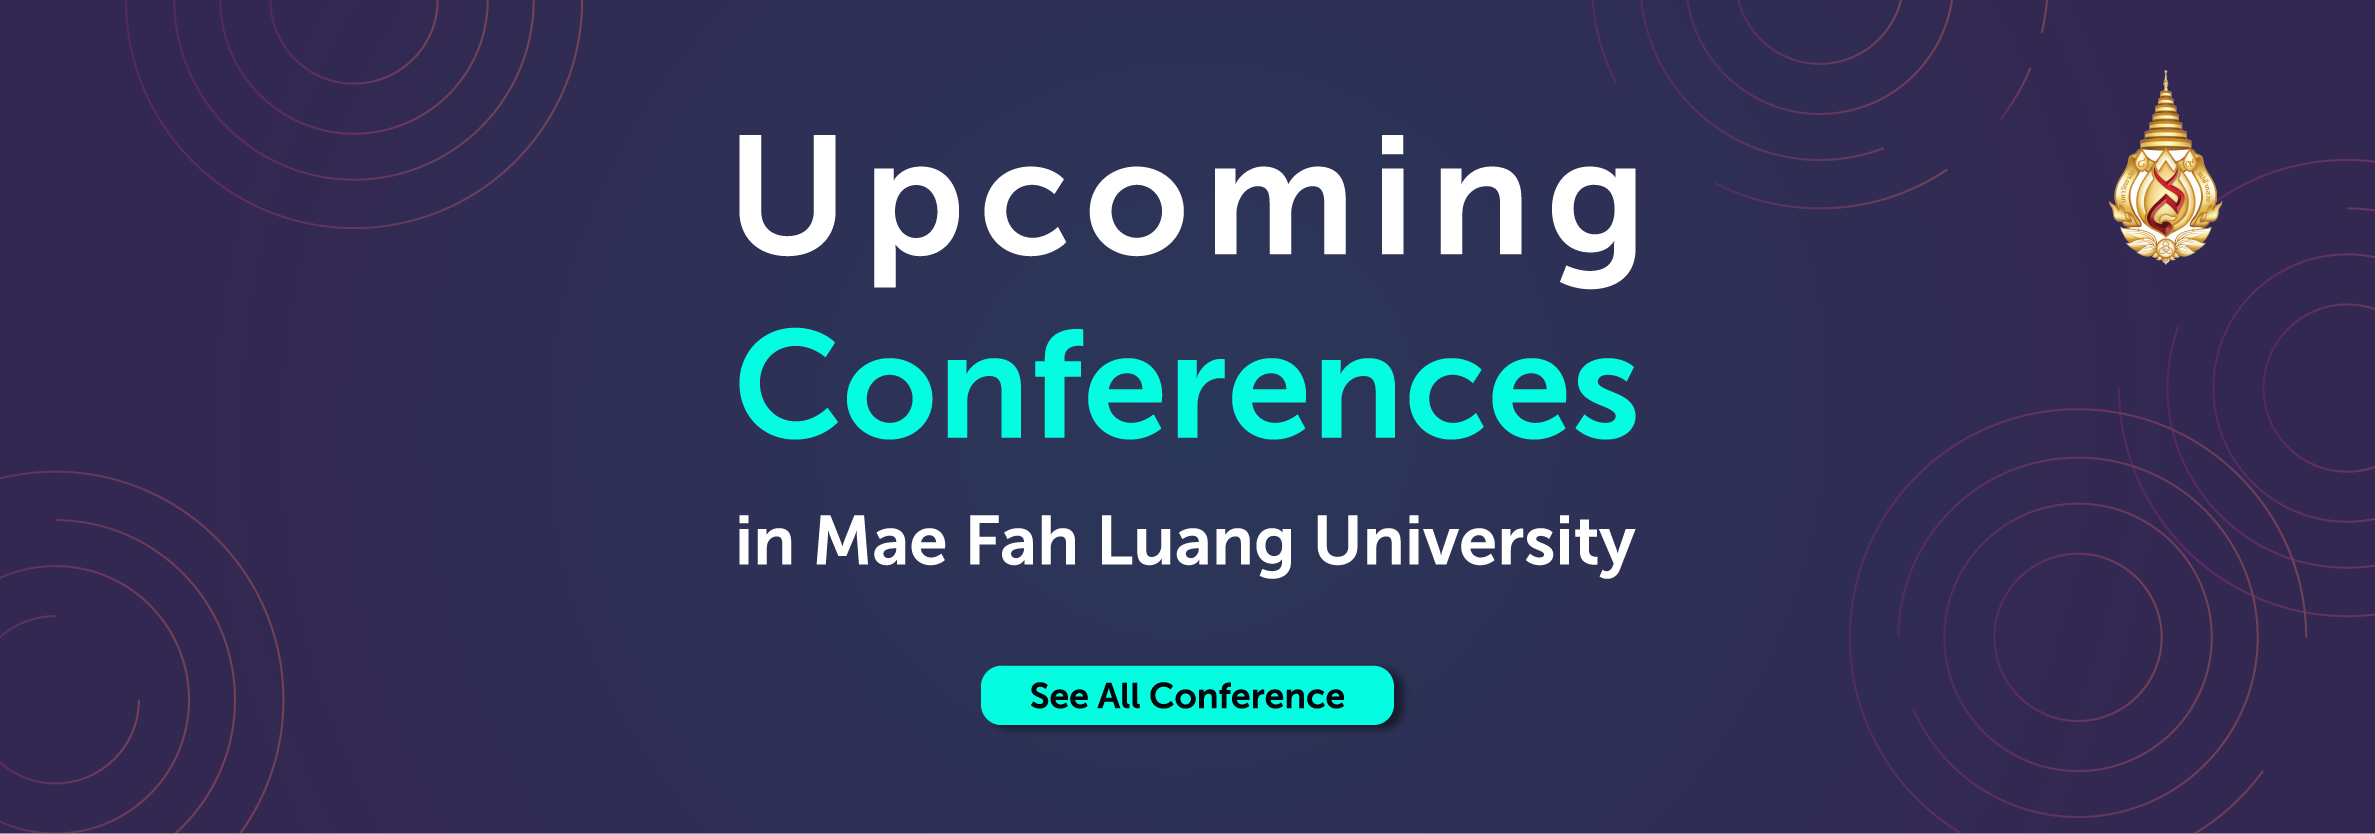 upcoming conference